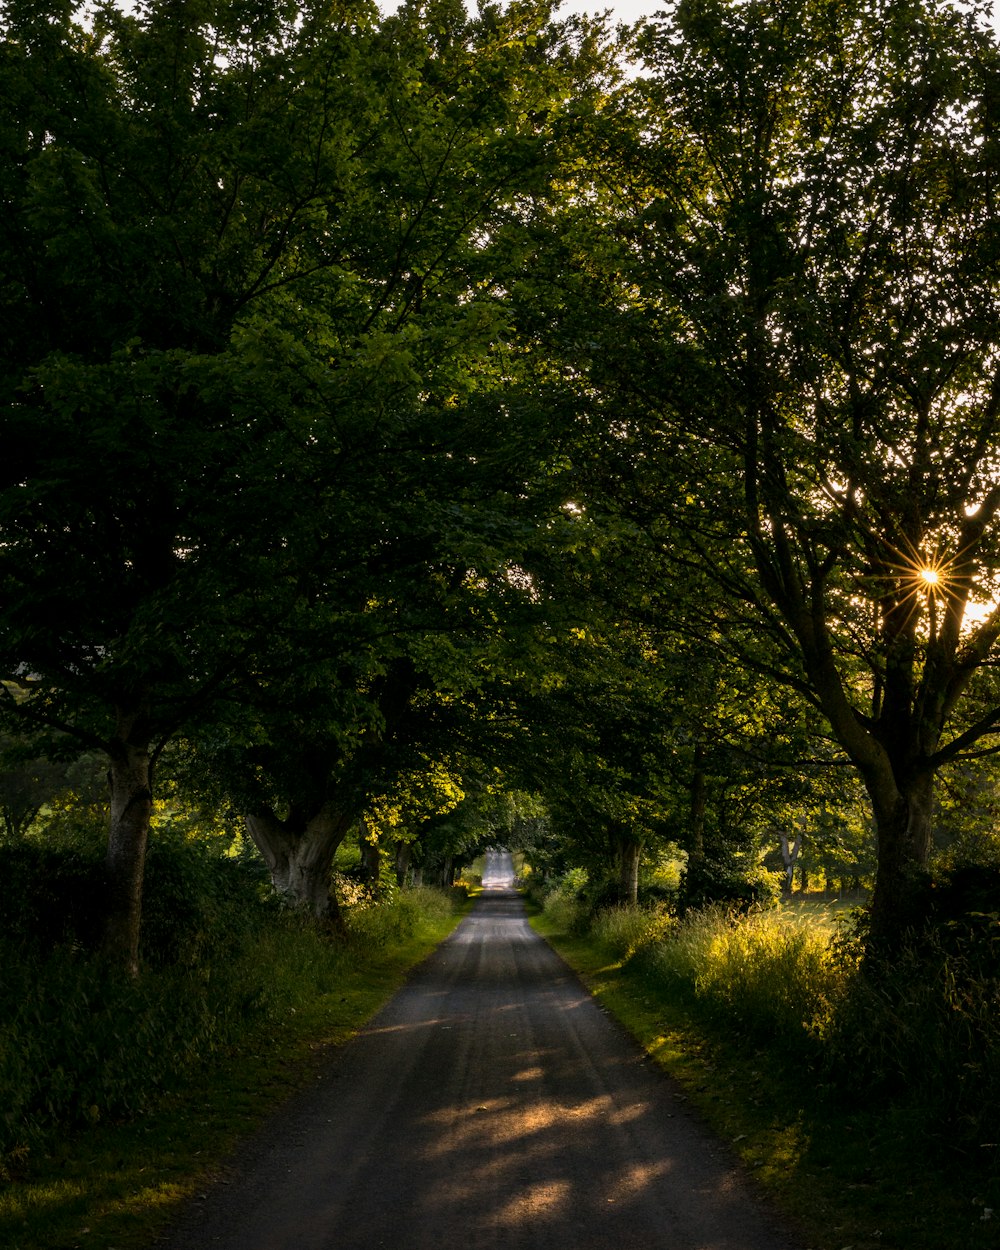 a dirt road surrounded by trees and grass